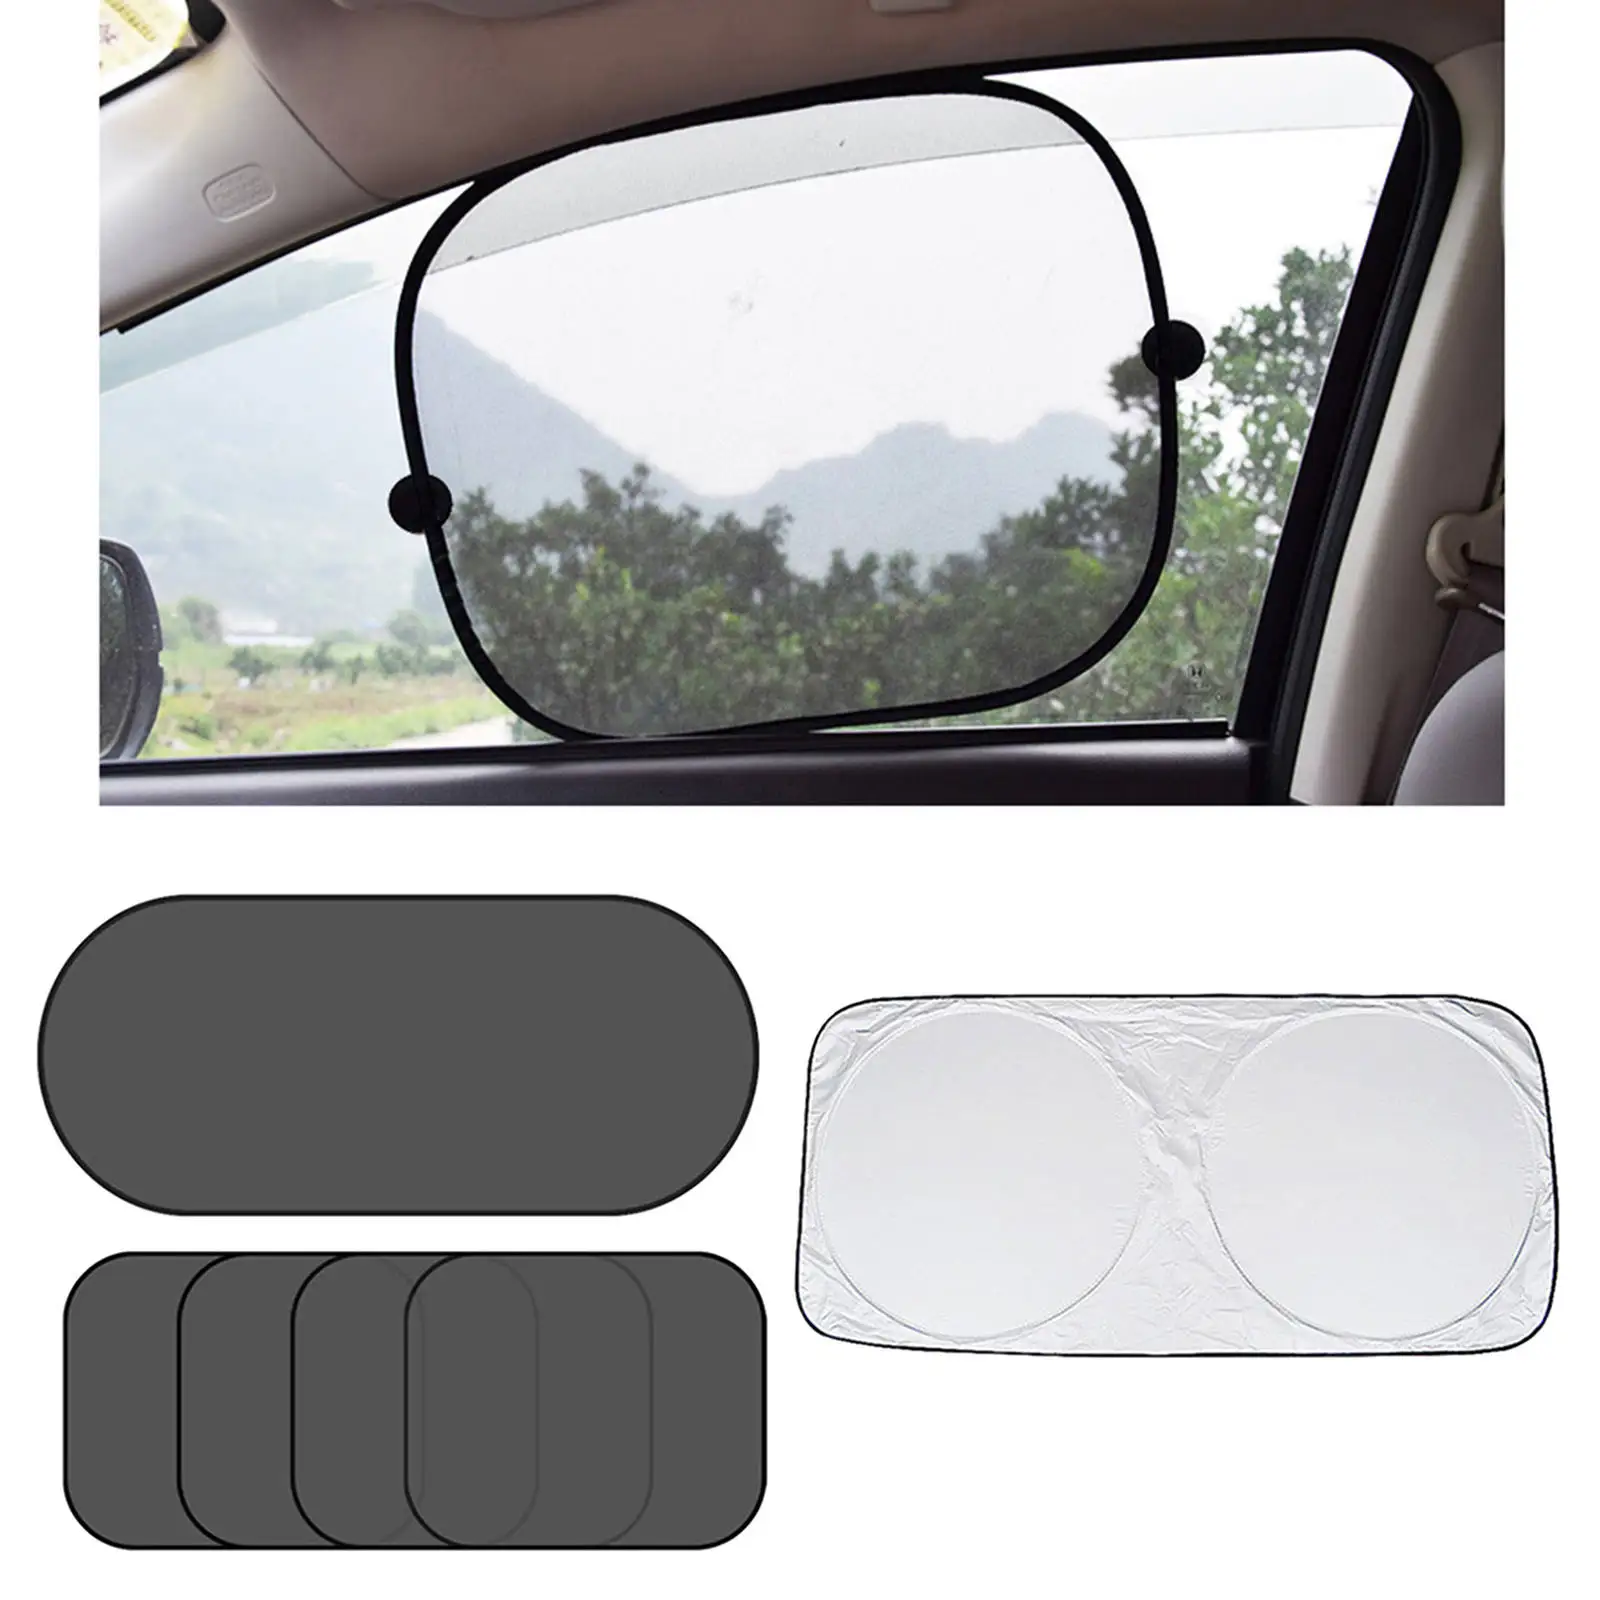 Car Sunshade Cover Protect Kids Pets Interior Accessories Back Seat Windshield Sun Shade Sun Visor Protector Fits for Car Van